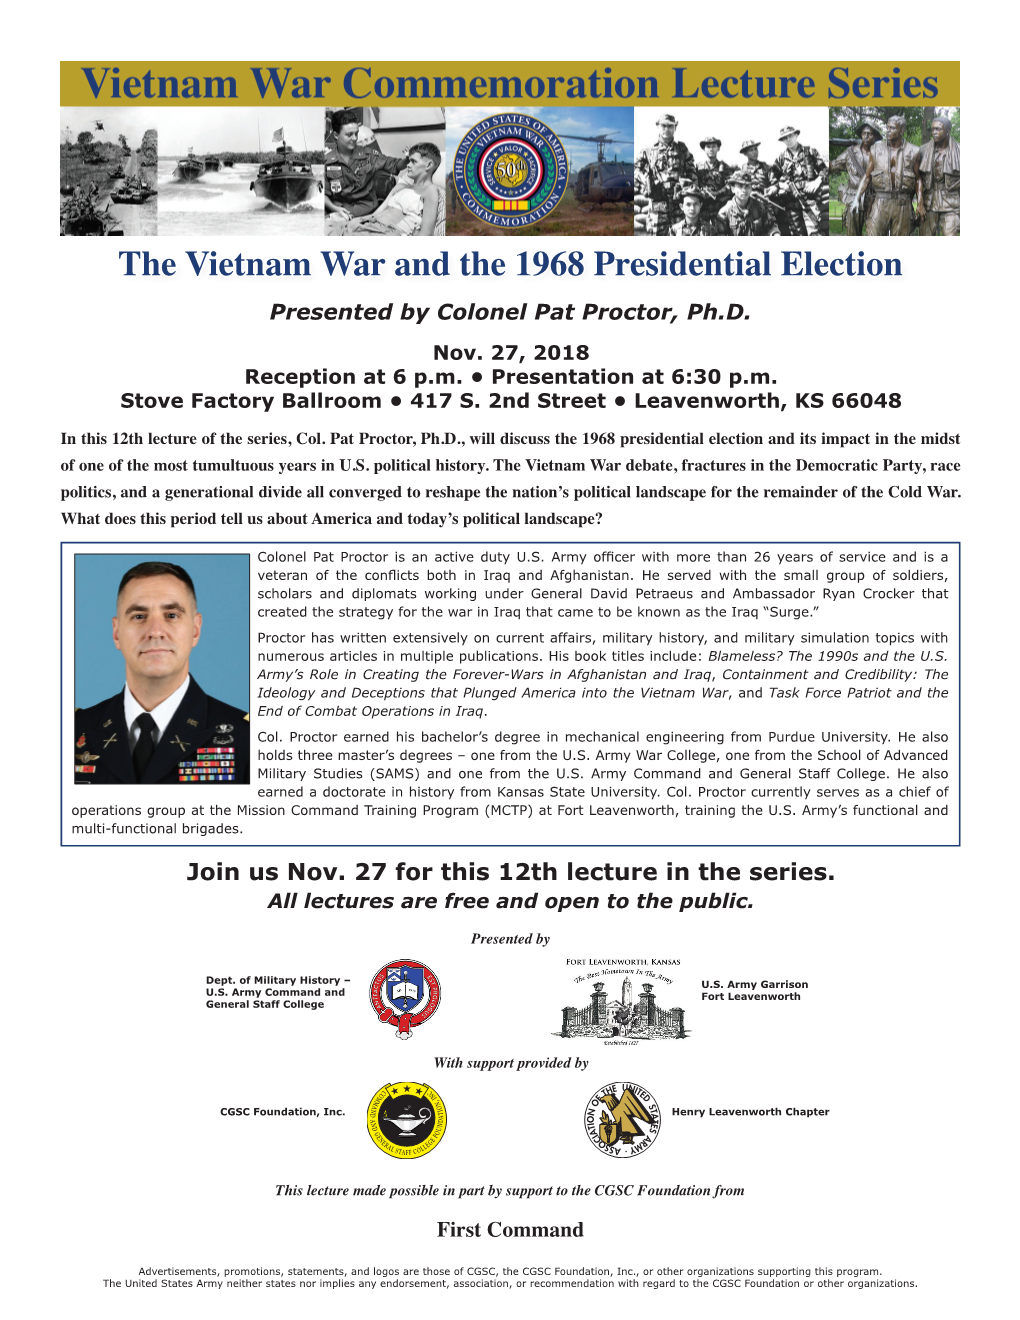 The Vietnam War and the 1968 Presidential Election Presented by Colonel Pat Proctor, Ph.D